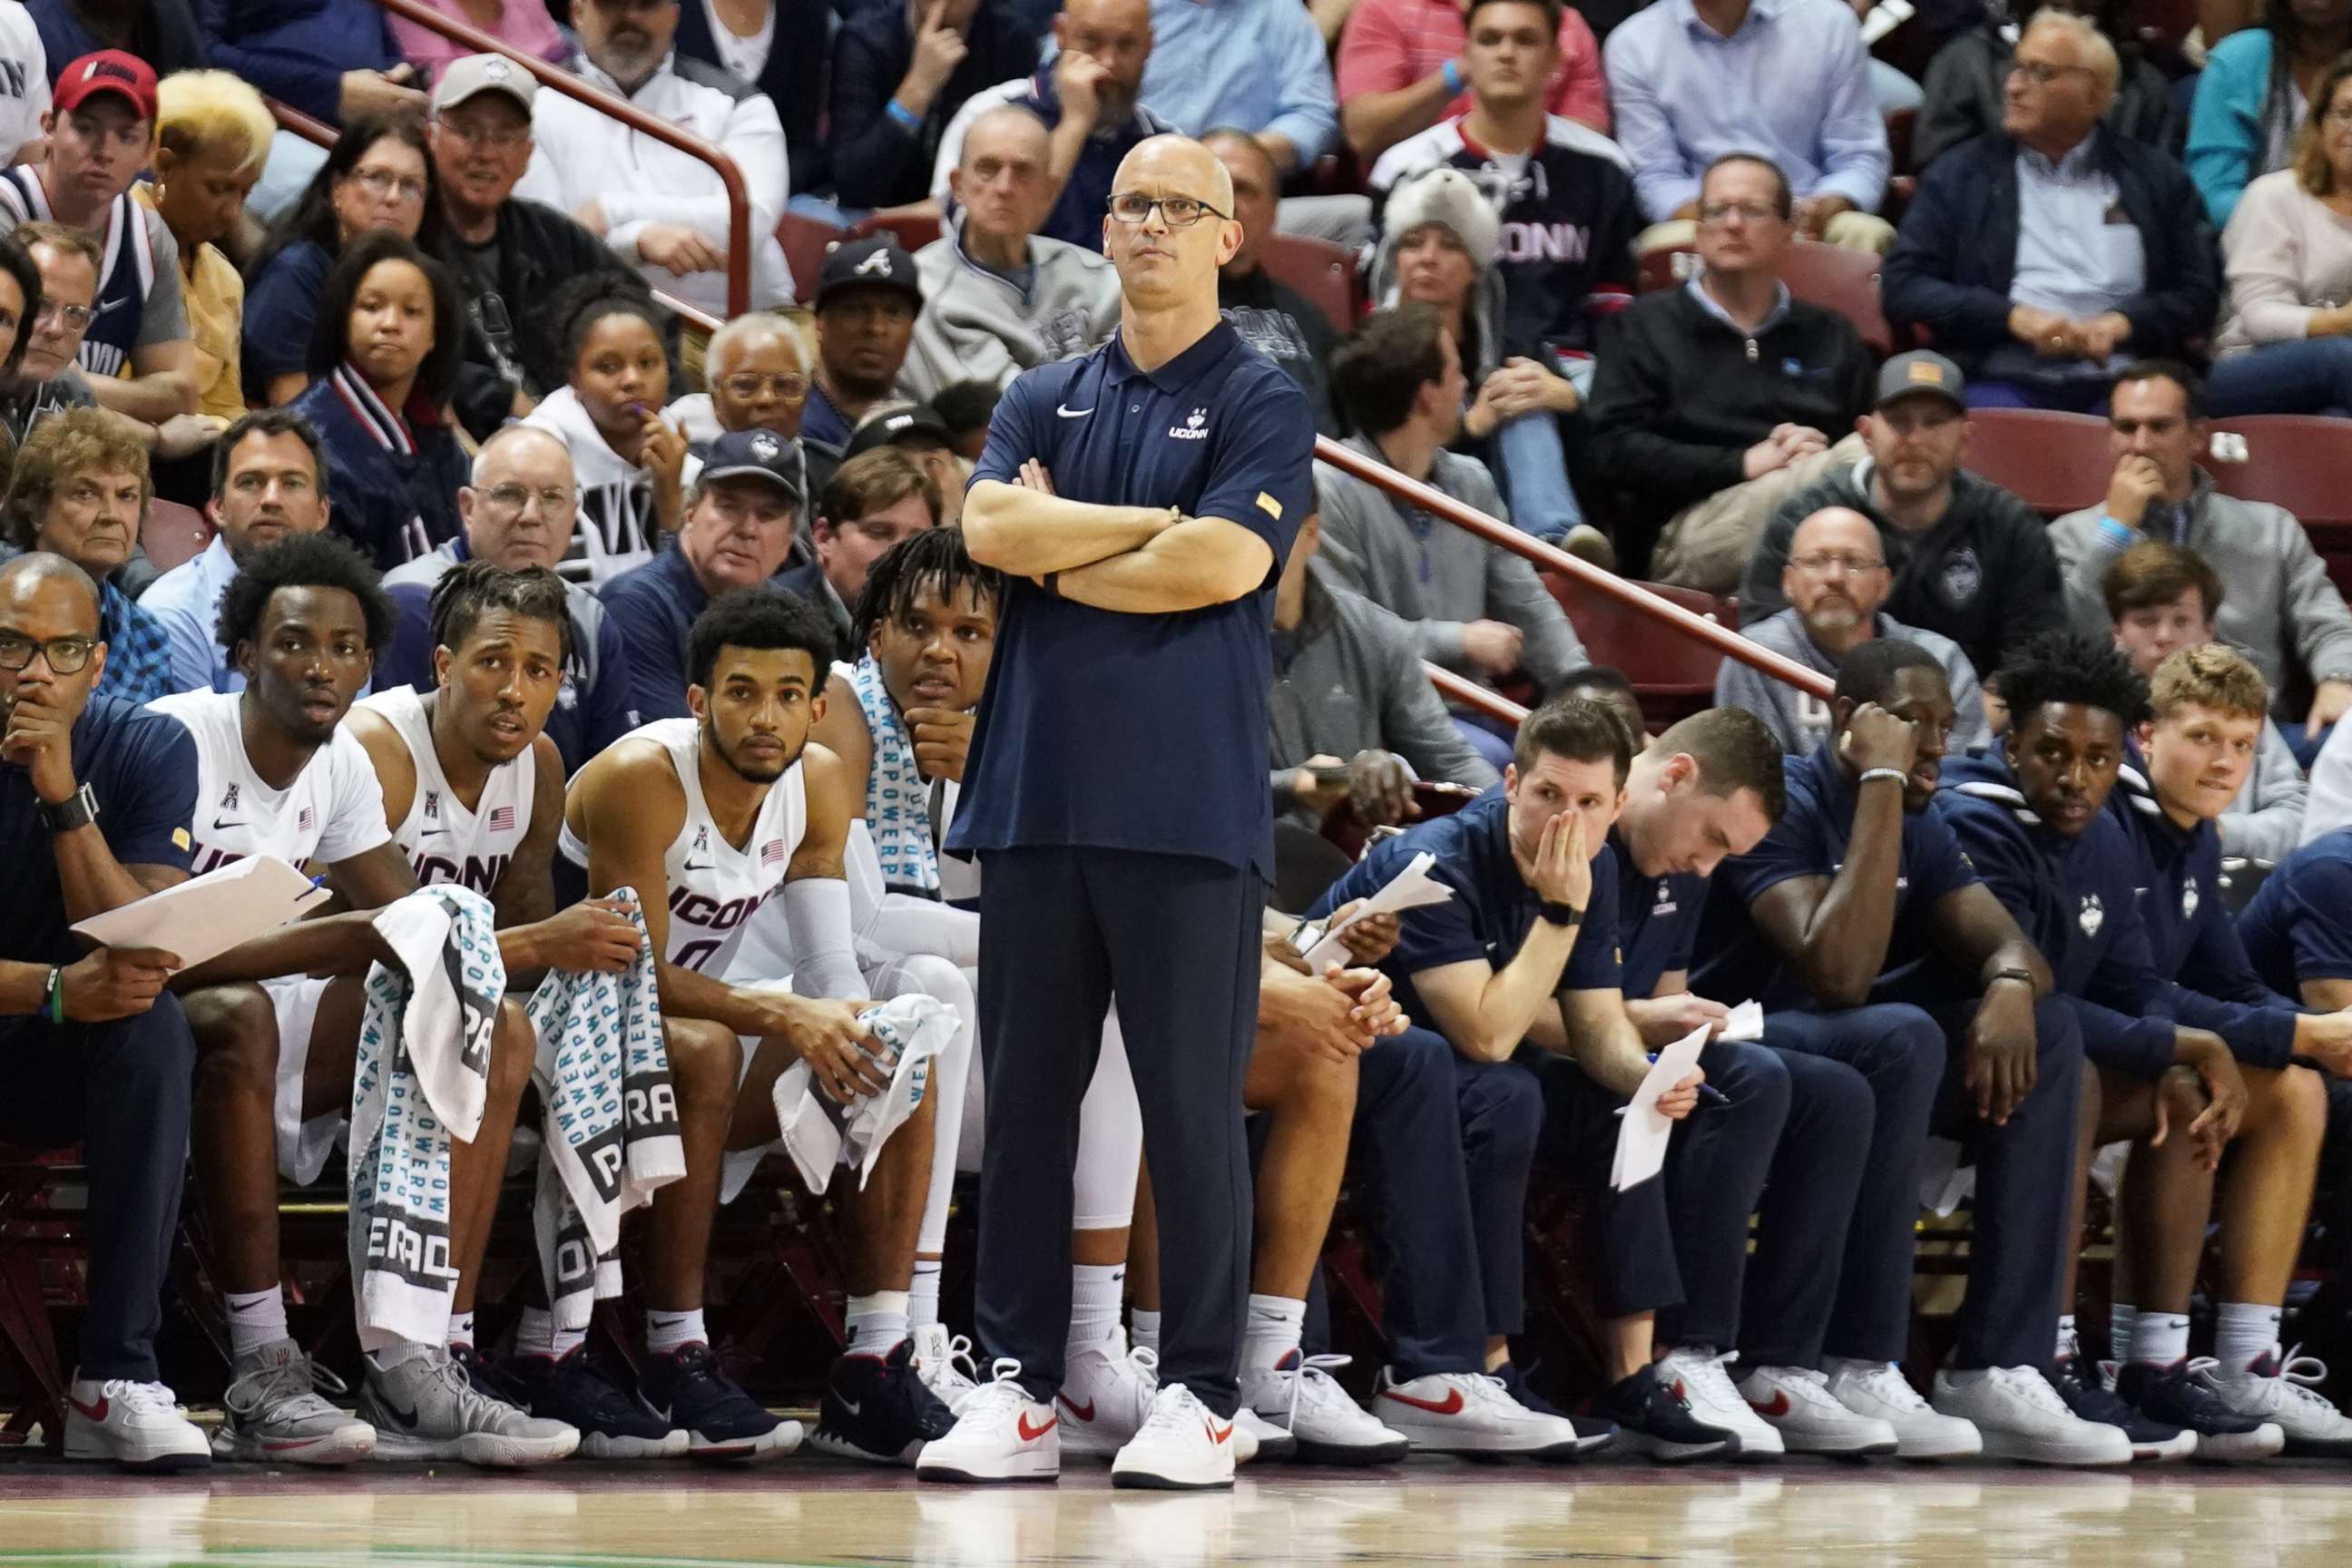 PHOTO: In this Nov. 22, 2019, file photo, head coach Dan Hurley of the Connecticut Huskies looks on during a second round Charleston Classic basketball game against the Xavier Musketeers at the TD Arena in Charleston, S.C.